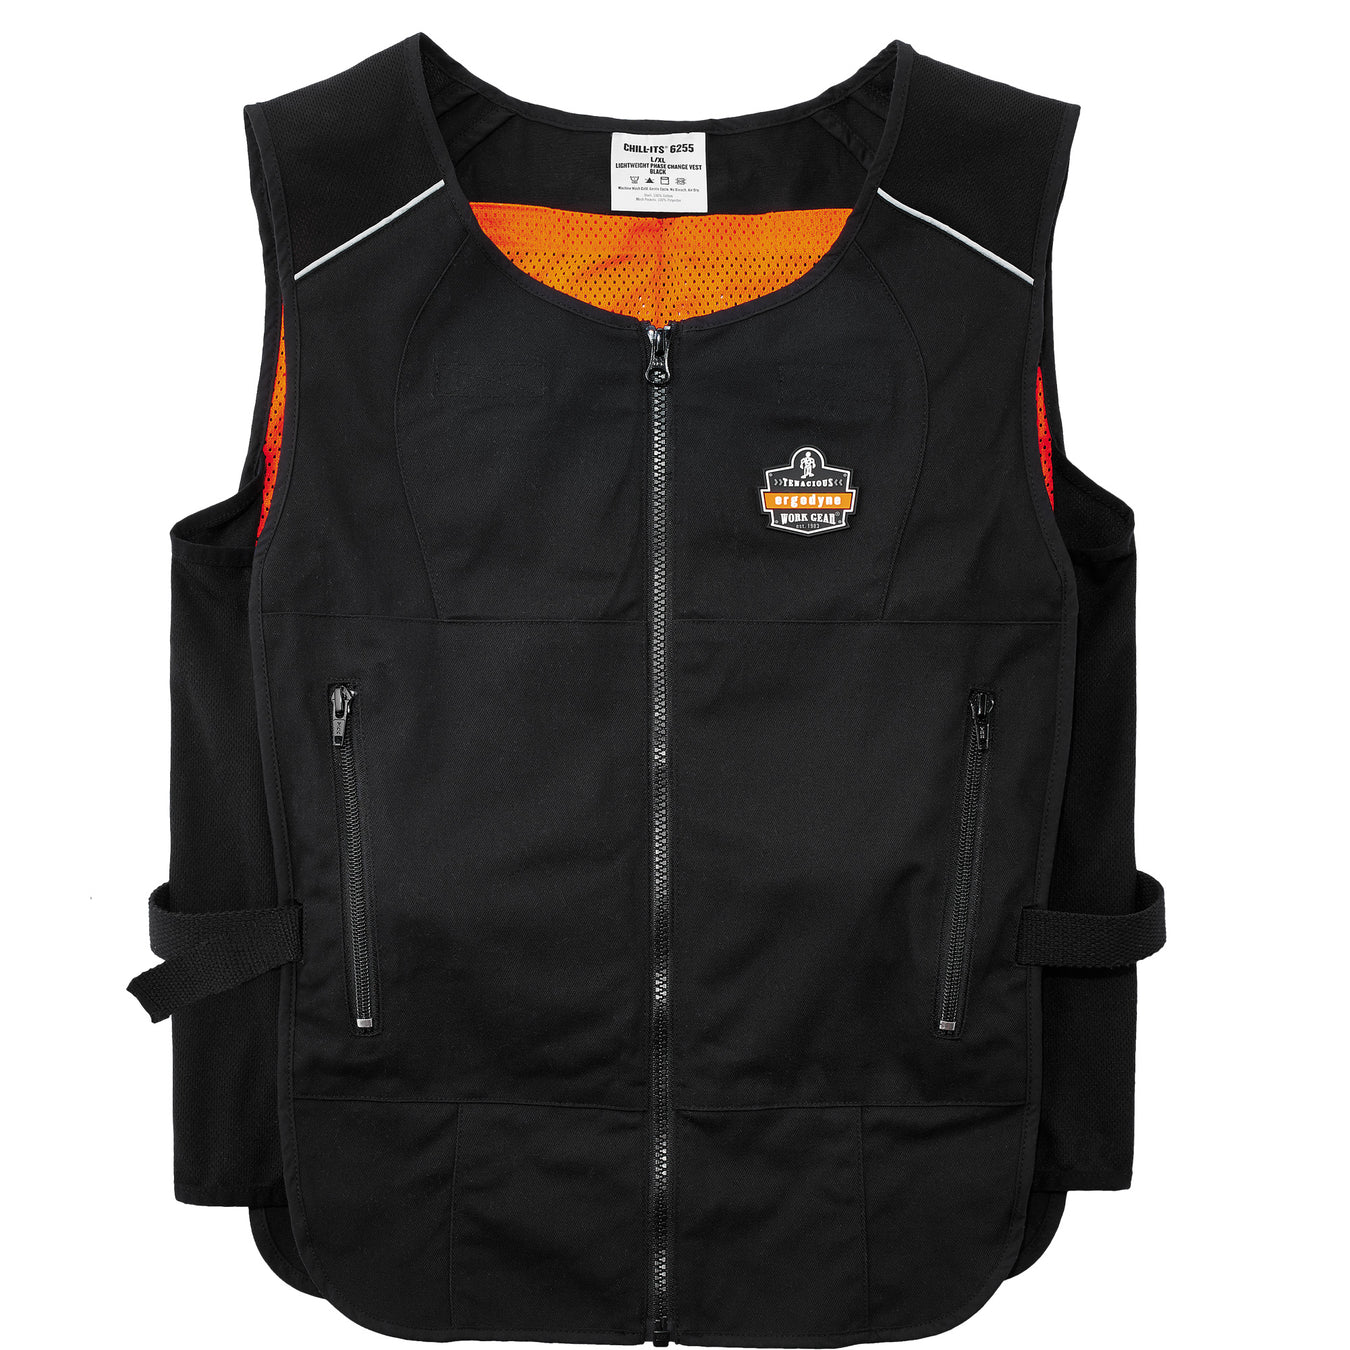 Chill-Its® 6255 Lightweight Phase Change Cooling Vest